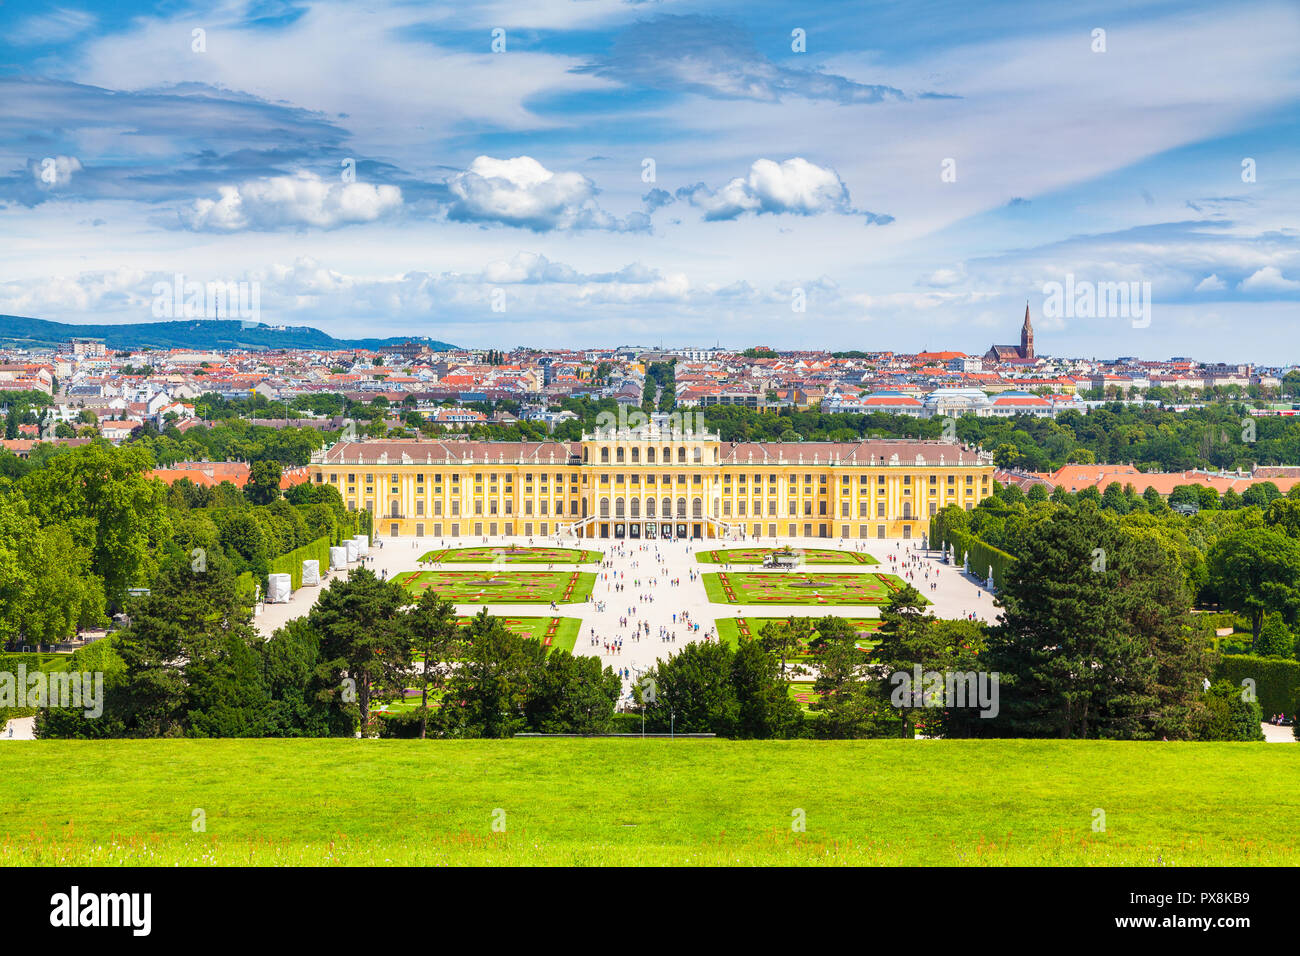 Classic view of famous Schonbrunn Palace with scenic Great Parterre garden on a beautiful sunny day with blue sky and clouds in summer, Vienna Stock Photo